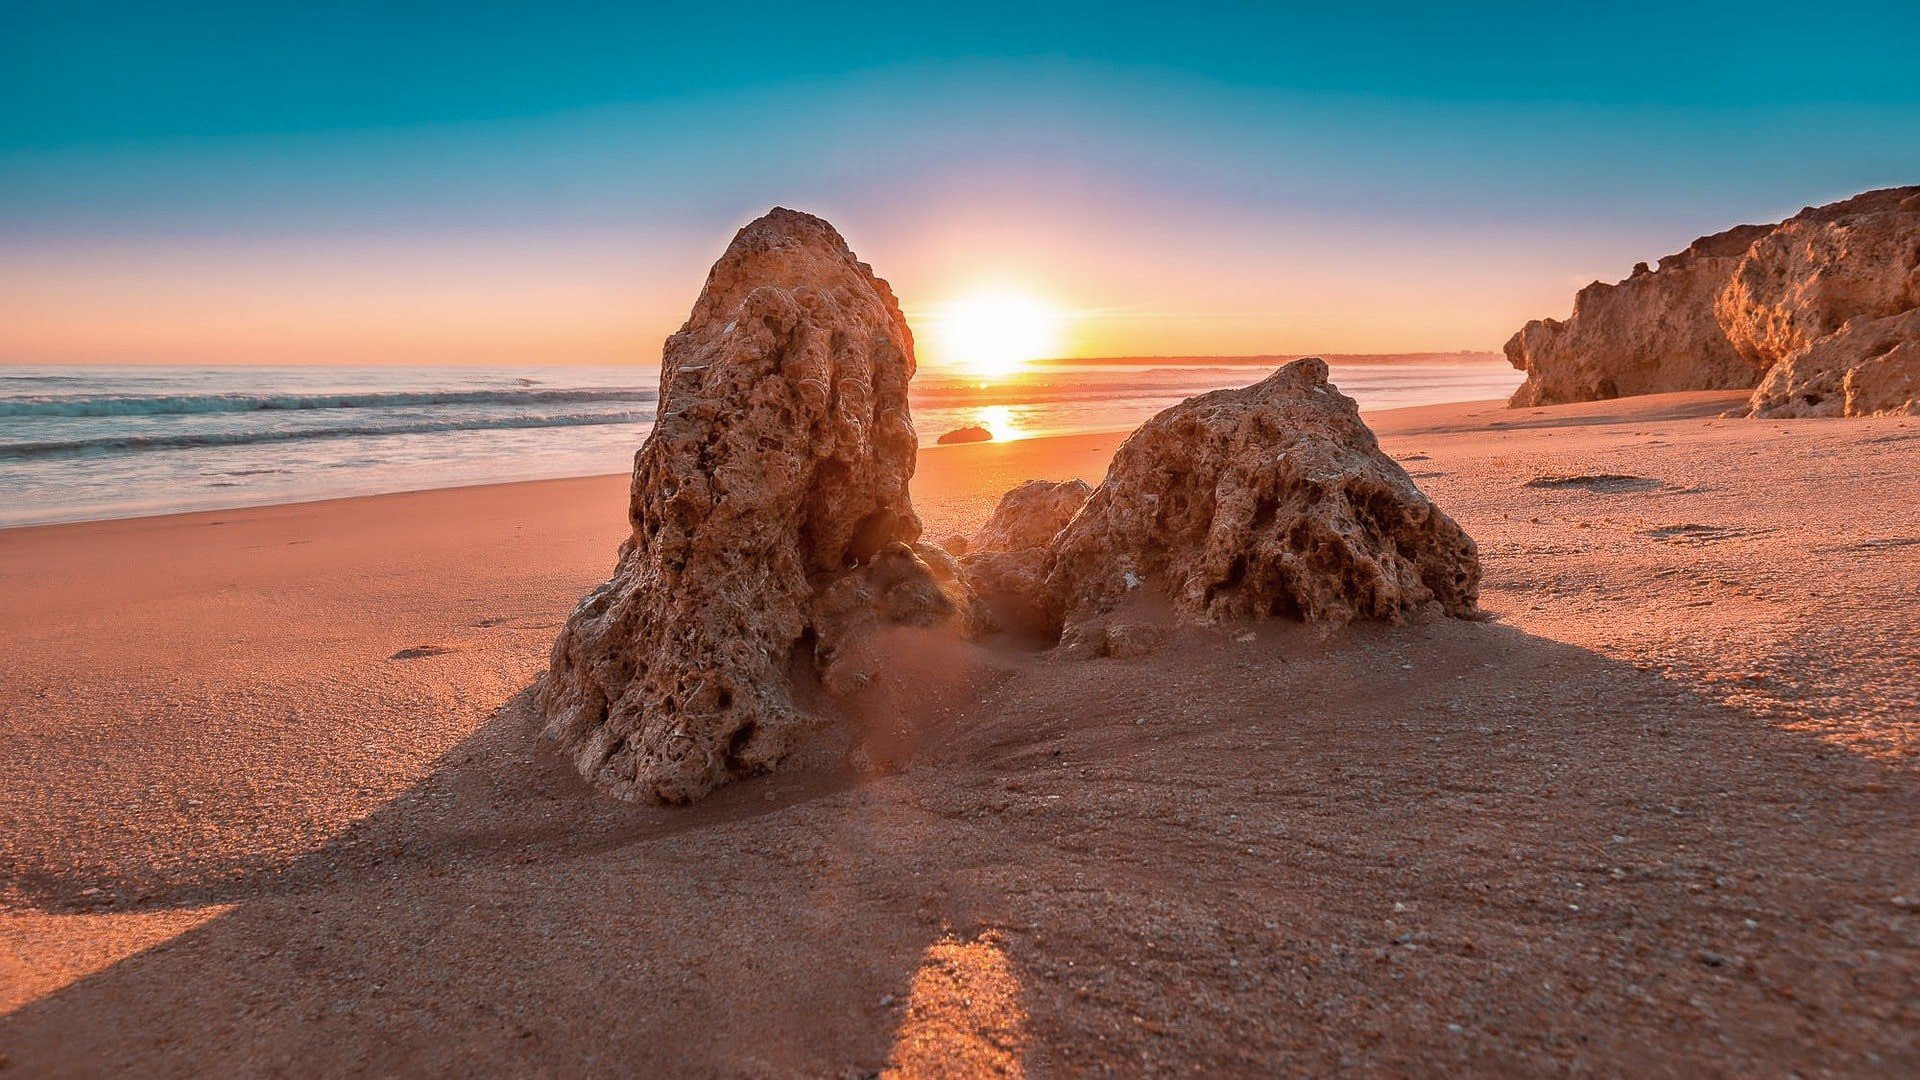 TrovaTrip rock formation on the shores of a beach with sun setting behind the horizon in Portugal